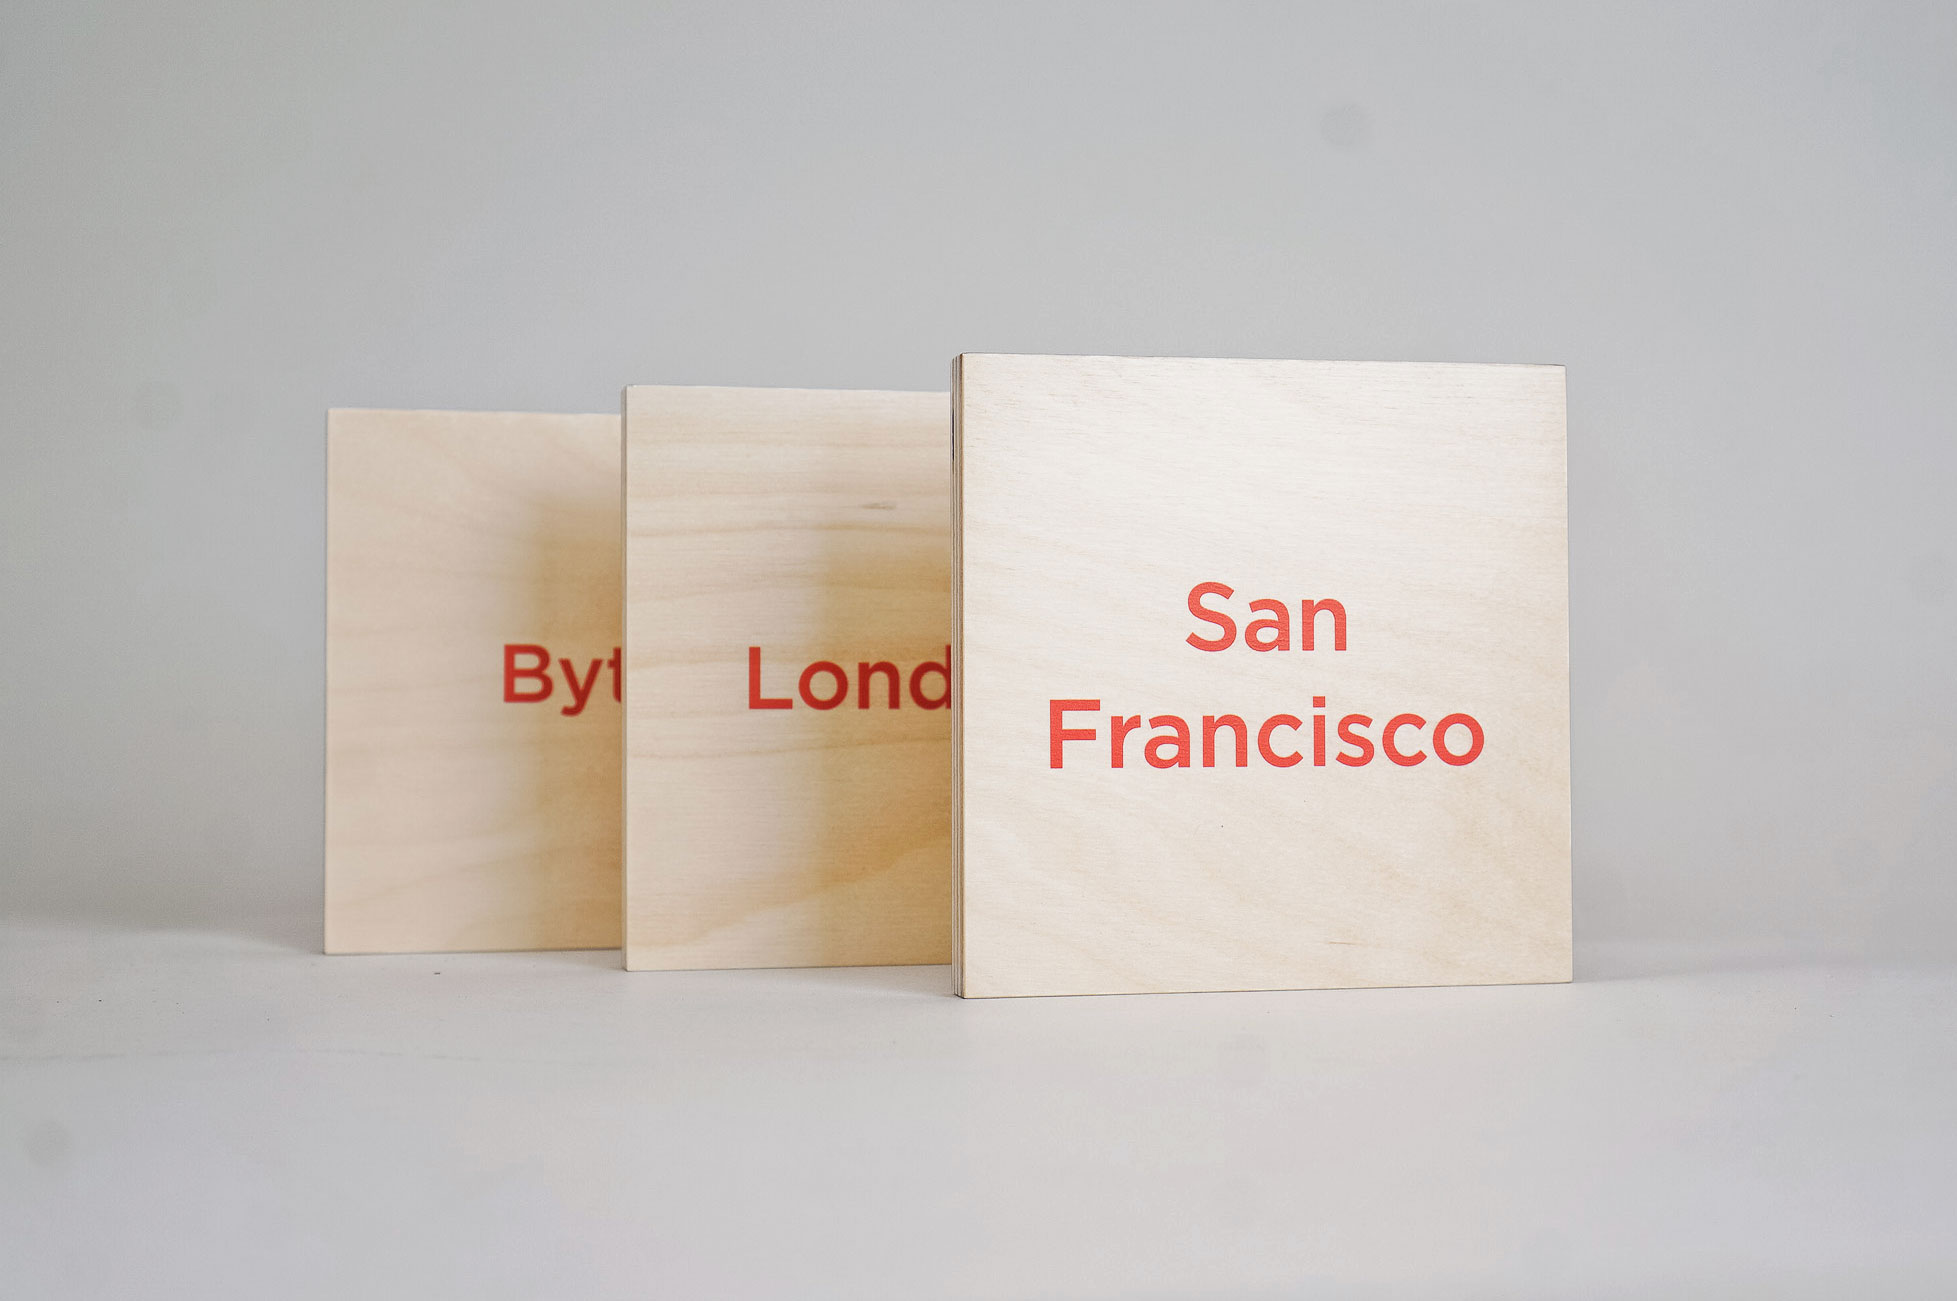 Light wood room signs with red text for PubNub, a global Data Stream Network and realtime infrastructure-as-a-service company based in San Francisco, California.